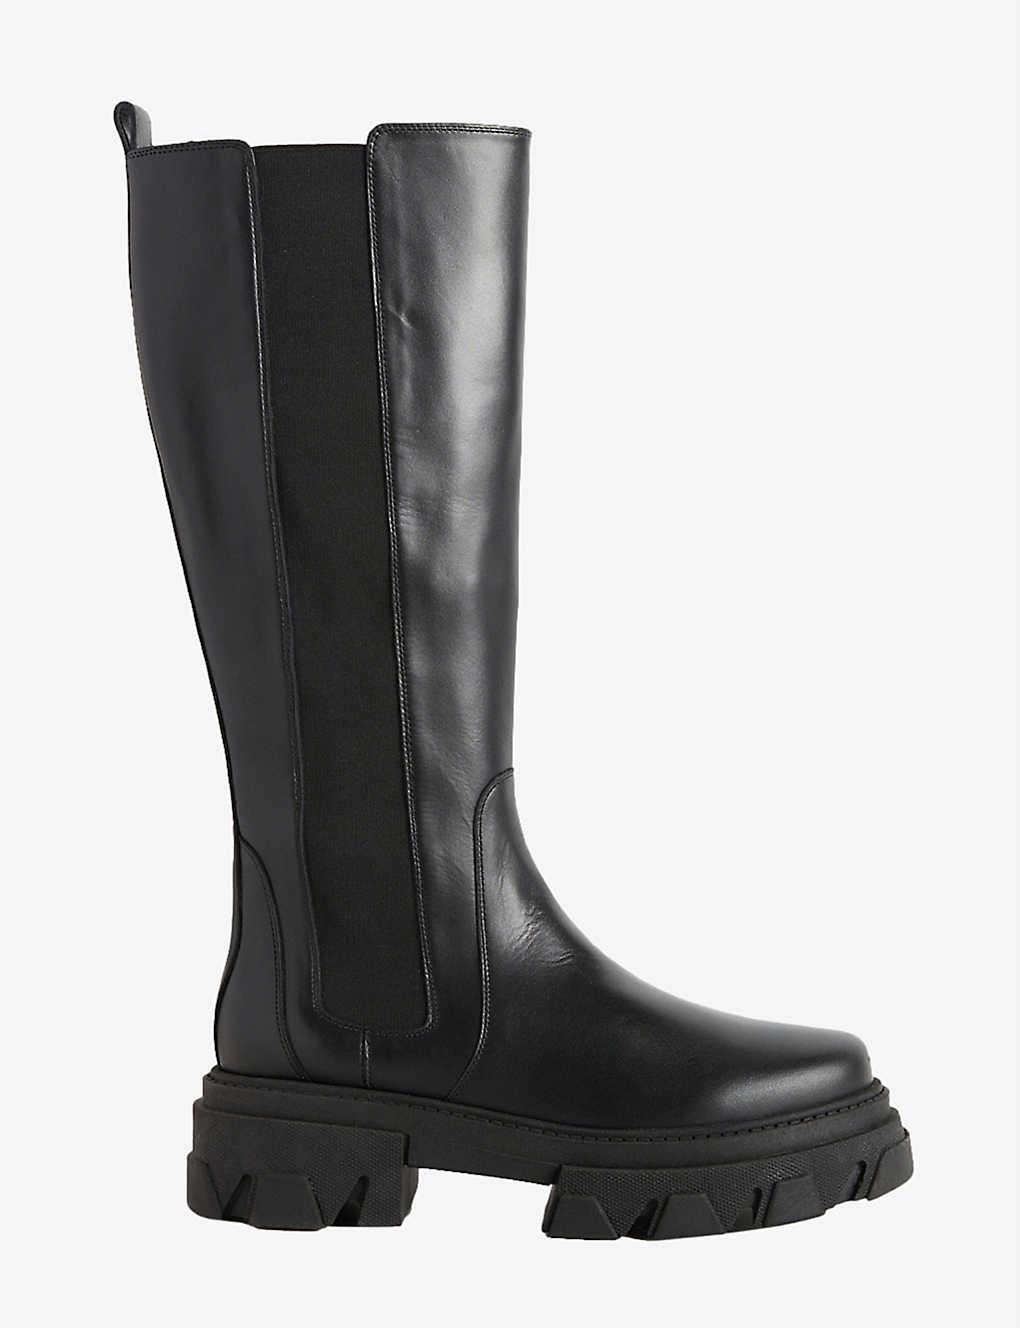 Claudie Pierlot Victoria Tall Leather Chelsea Boots in Black | Lyst